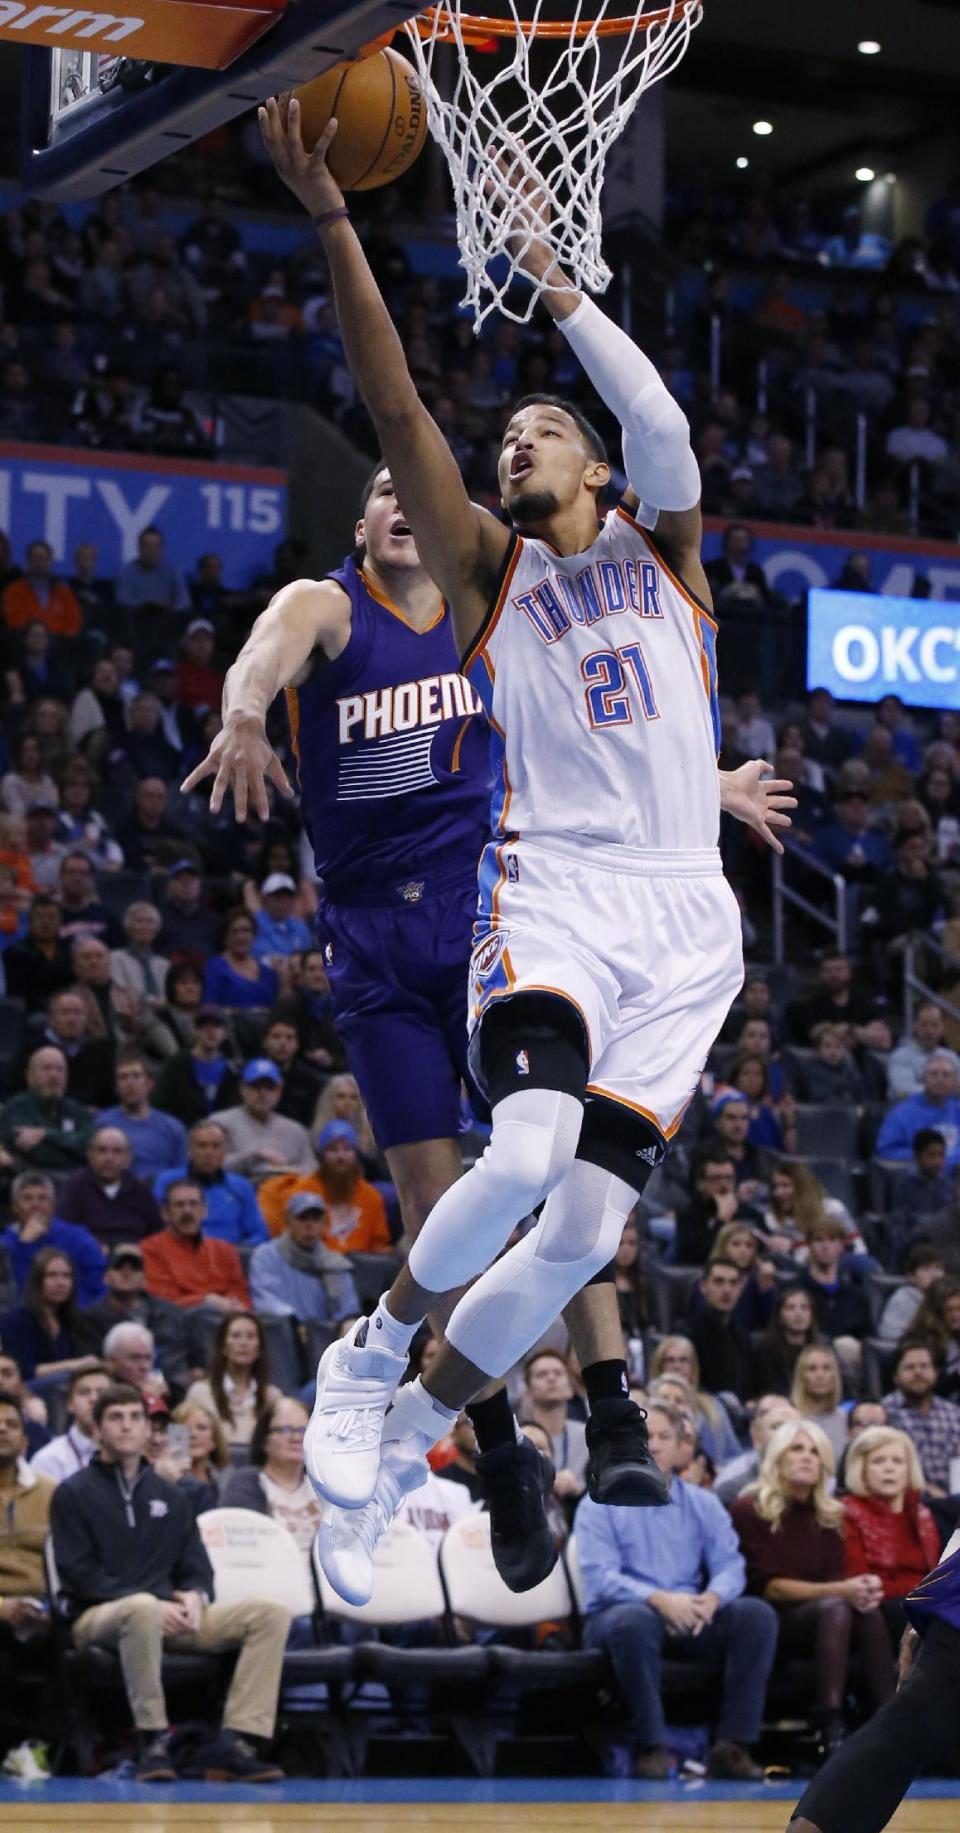 Oklahoma City Thunder forward Andre Roberson (21) shoots in front of Phoenix Suns guard Devin Booker (1) in the first quarter of an NBA basketball game in Oklahoma City, Saturday, Dec. 17, 2016. (AP Photo/Sue Ogrocki)